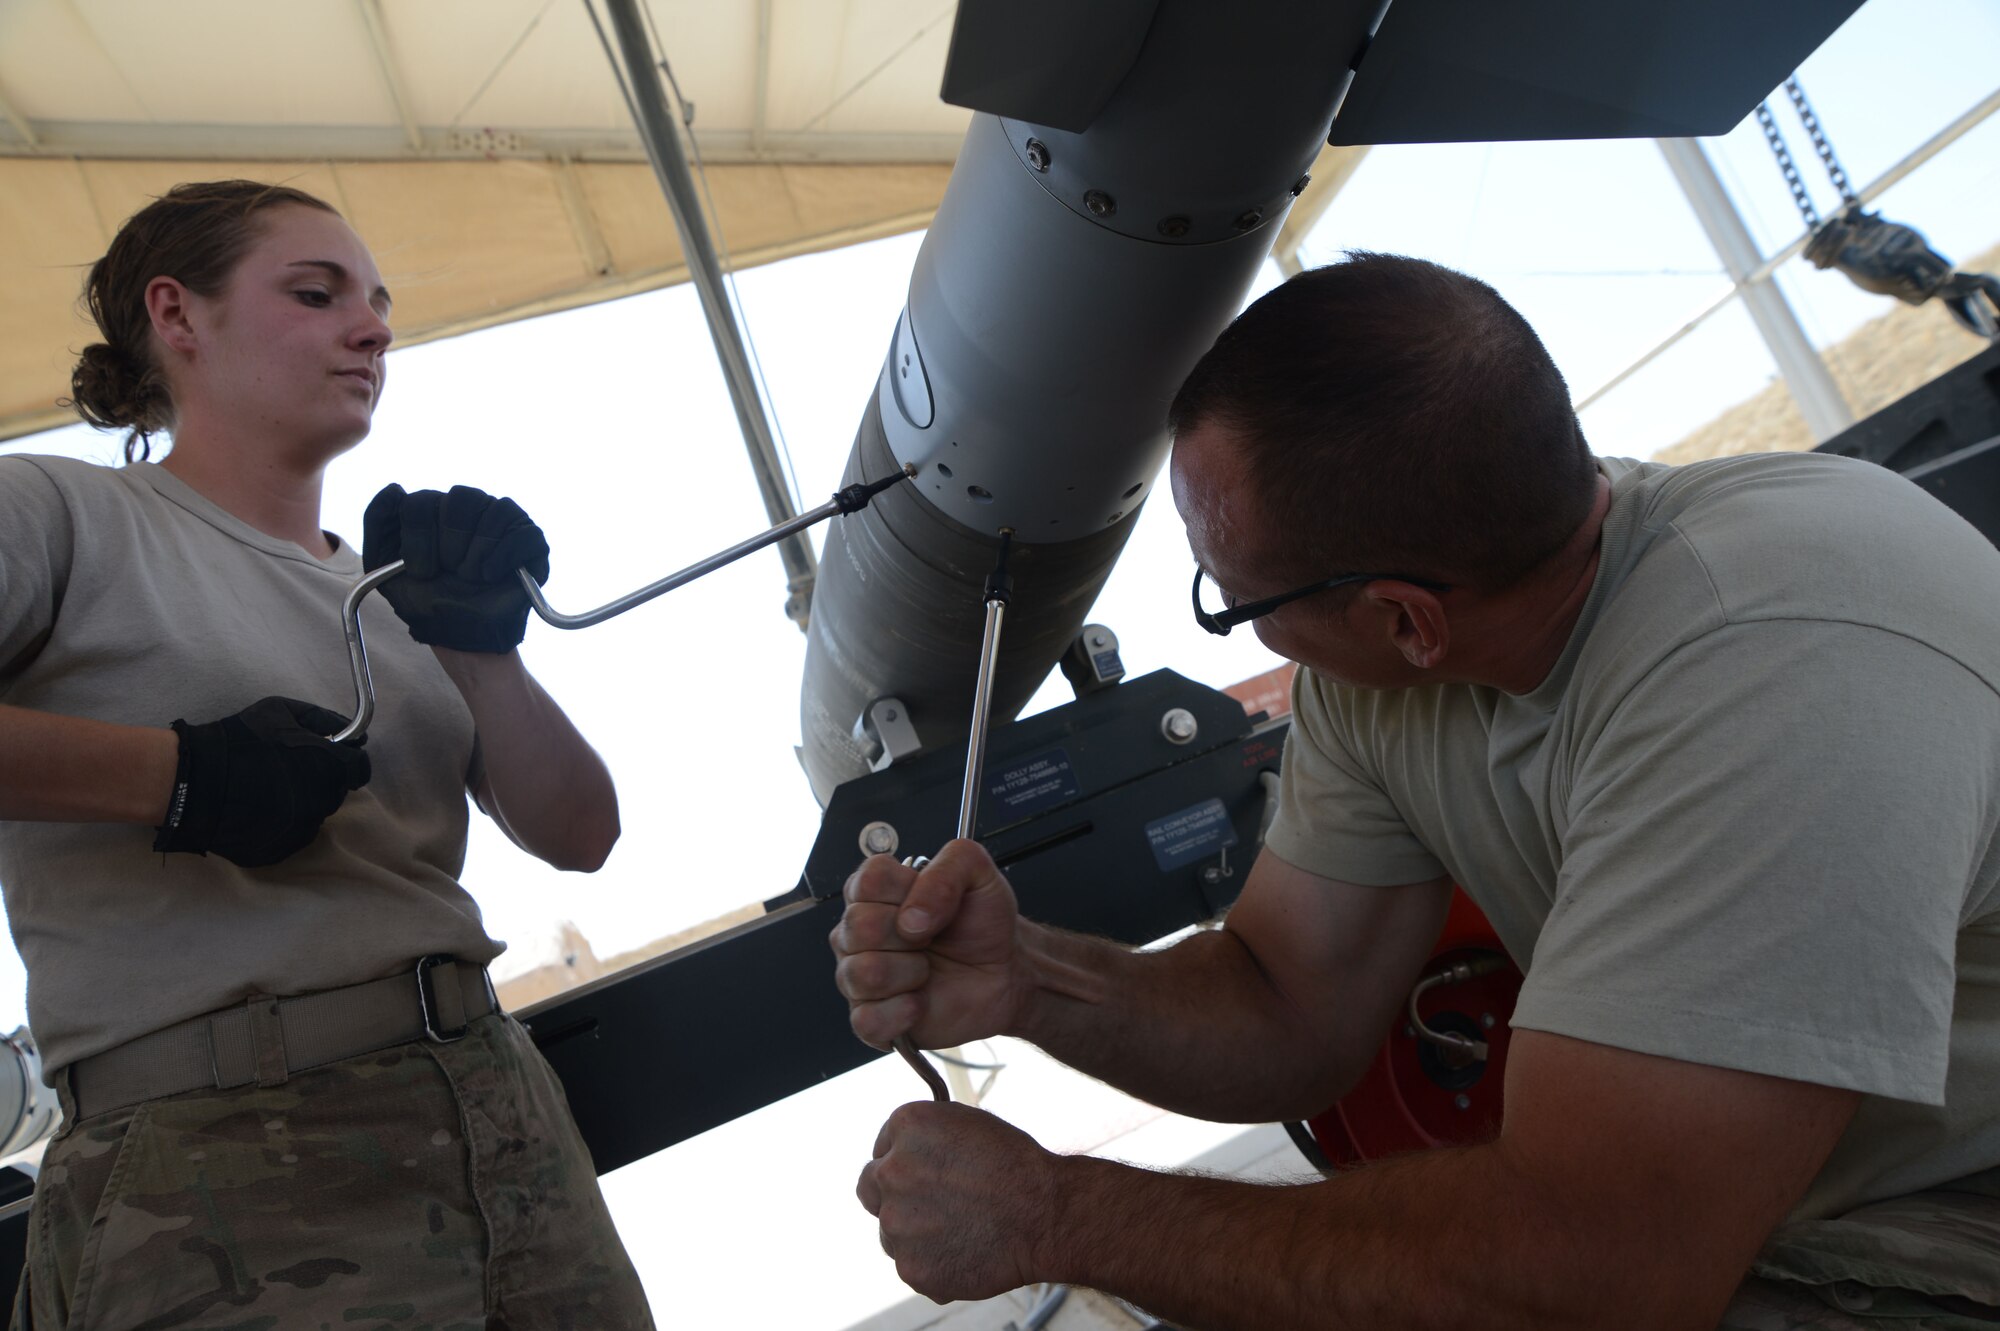 Airman 1st Class Casey Cain and Tech. Sgt. Patrick Williams tighten the screws on a GBU-38 during its construction while at Bagram Airfield, Afghanistan Aug. 14, 2014. The GBU-38 is a necessary part of the weapon system of the F-16C Fighting Falcon. Cain is a reservist  deployed from Whiteman Air Force Base, Mo. Williams is a reservist deployed from the 442nd Fighter Wing in Missouri. (U.S. Air Force photo by Master Sgt. Cohen A. Young)